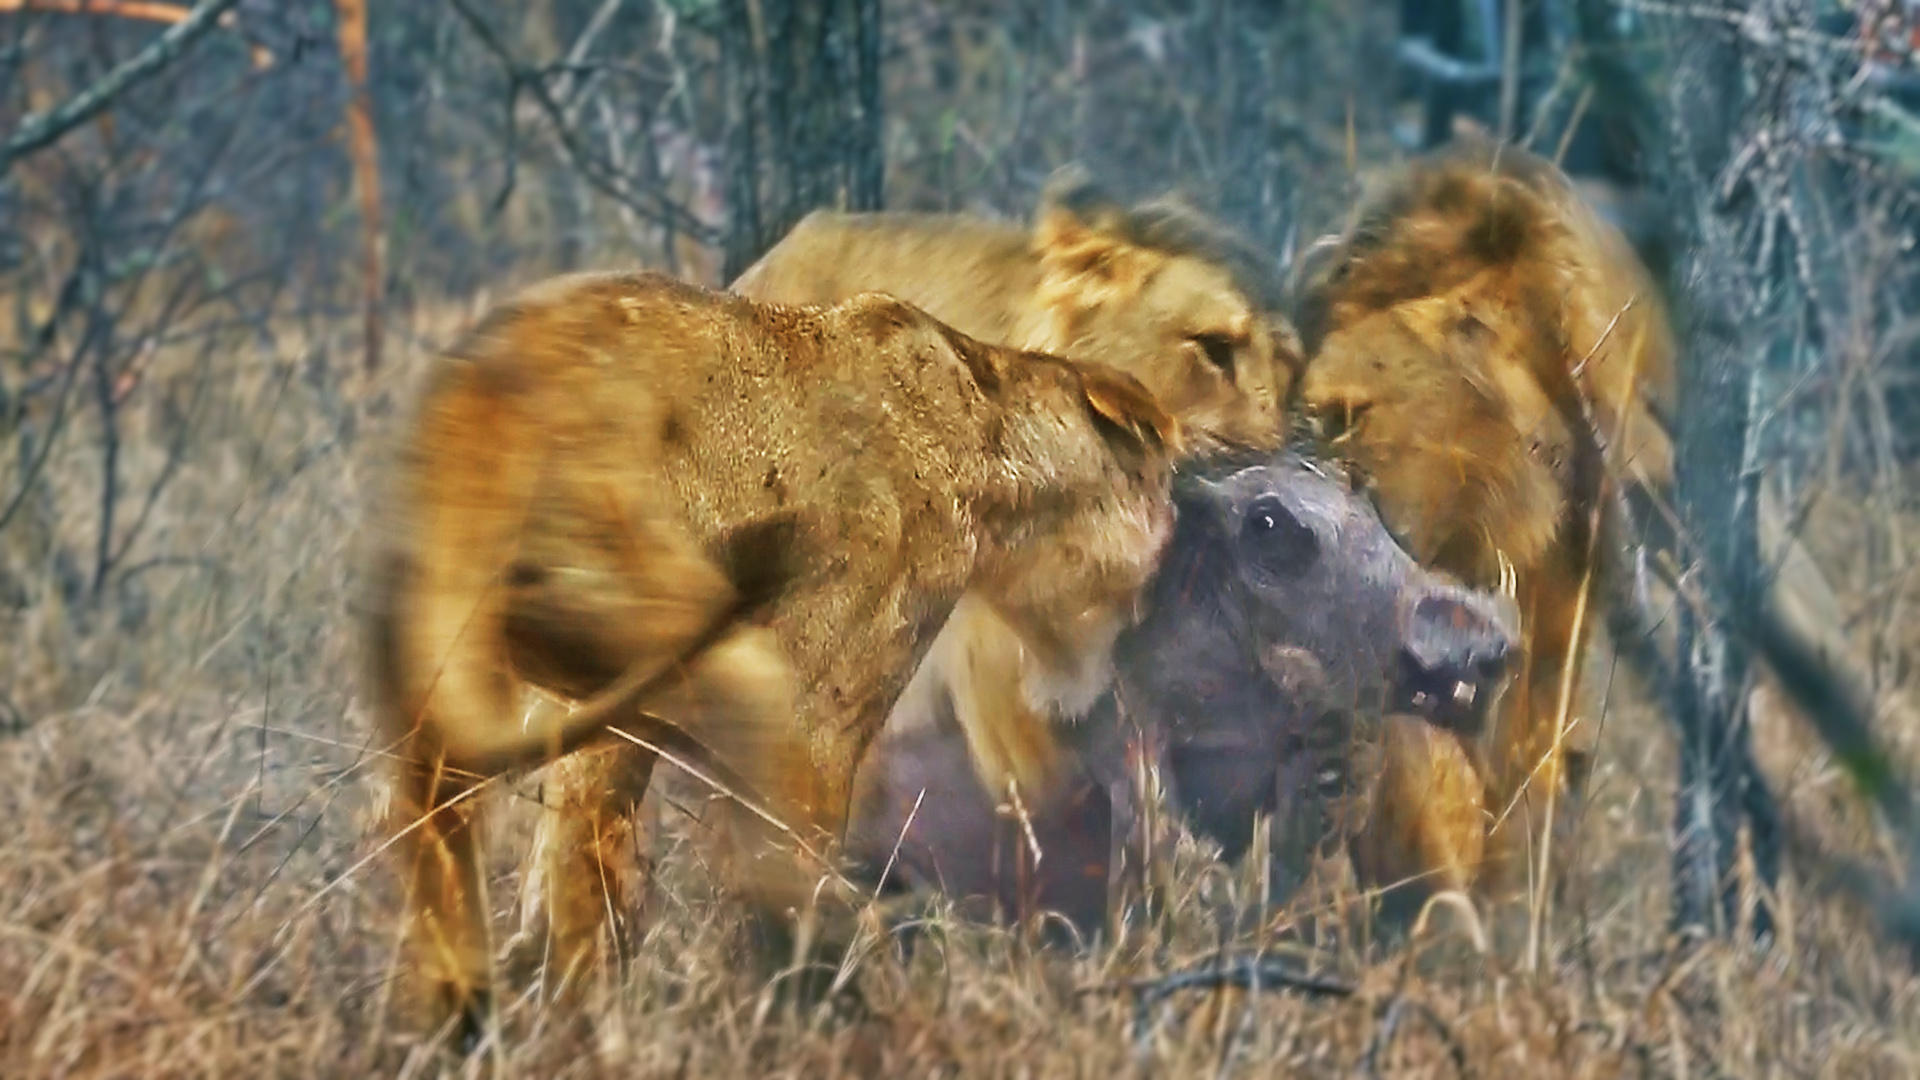 Lions Play Tug of War with Warthog Trying to Escape